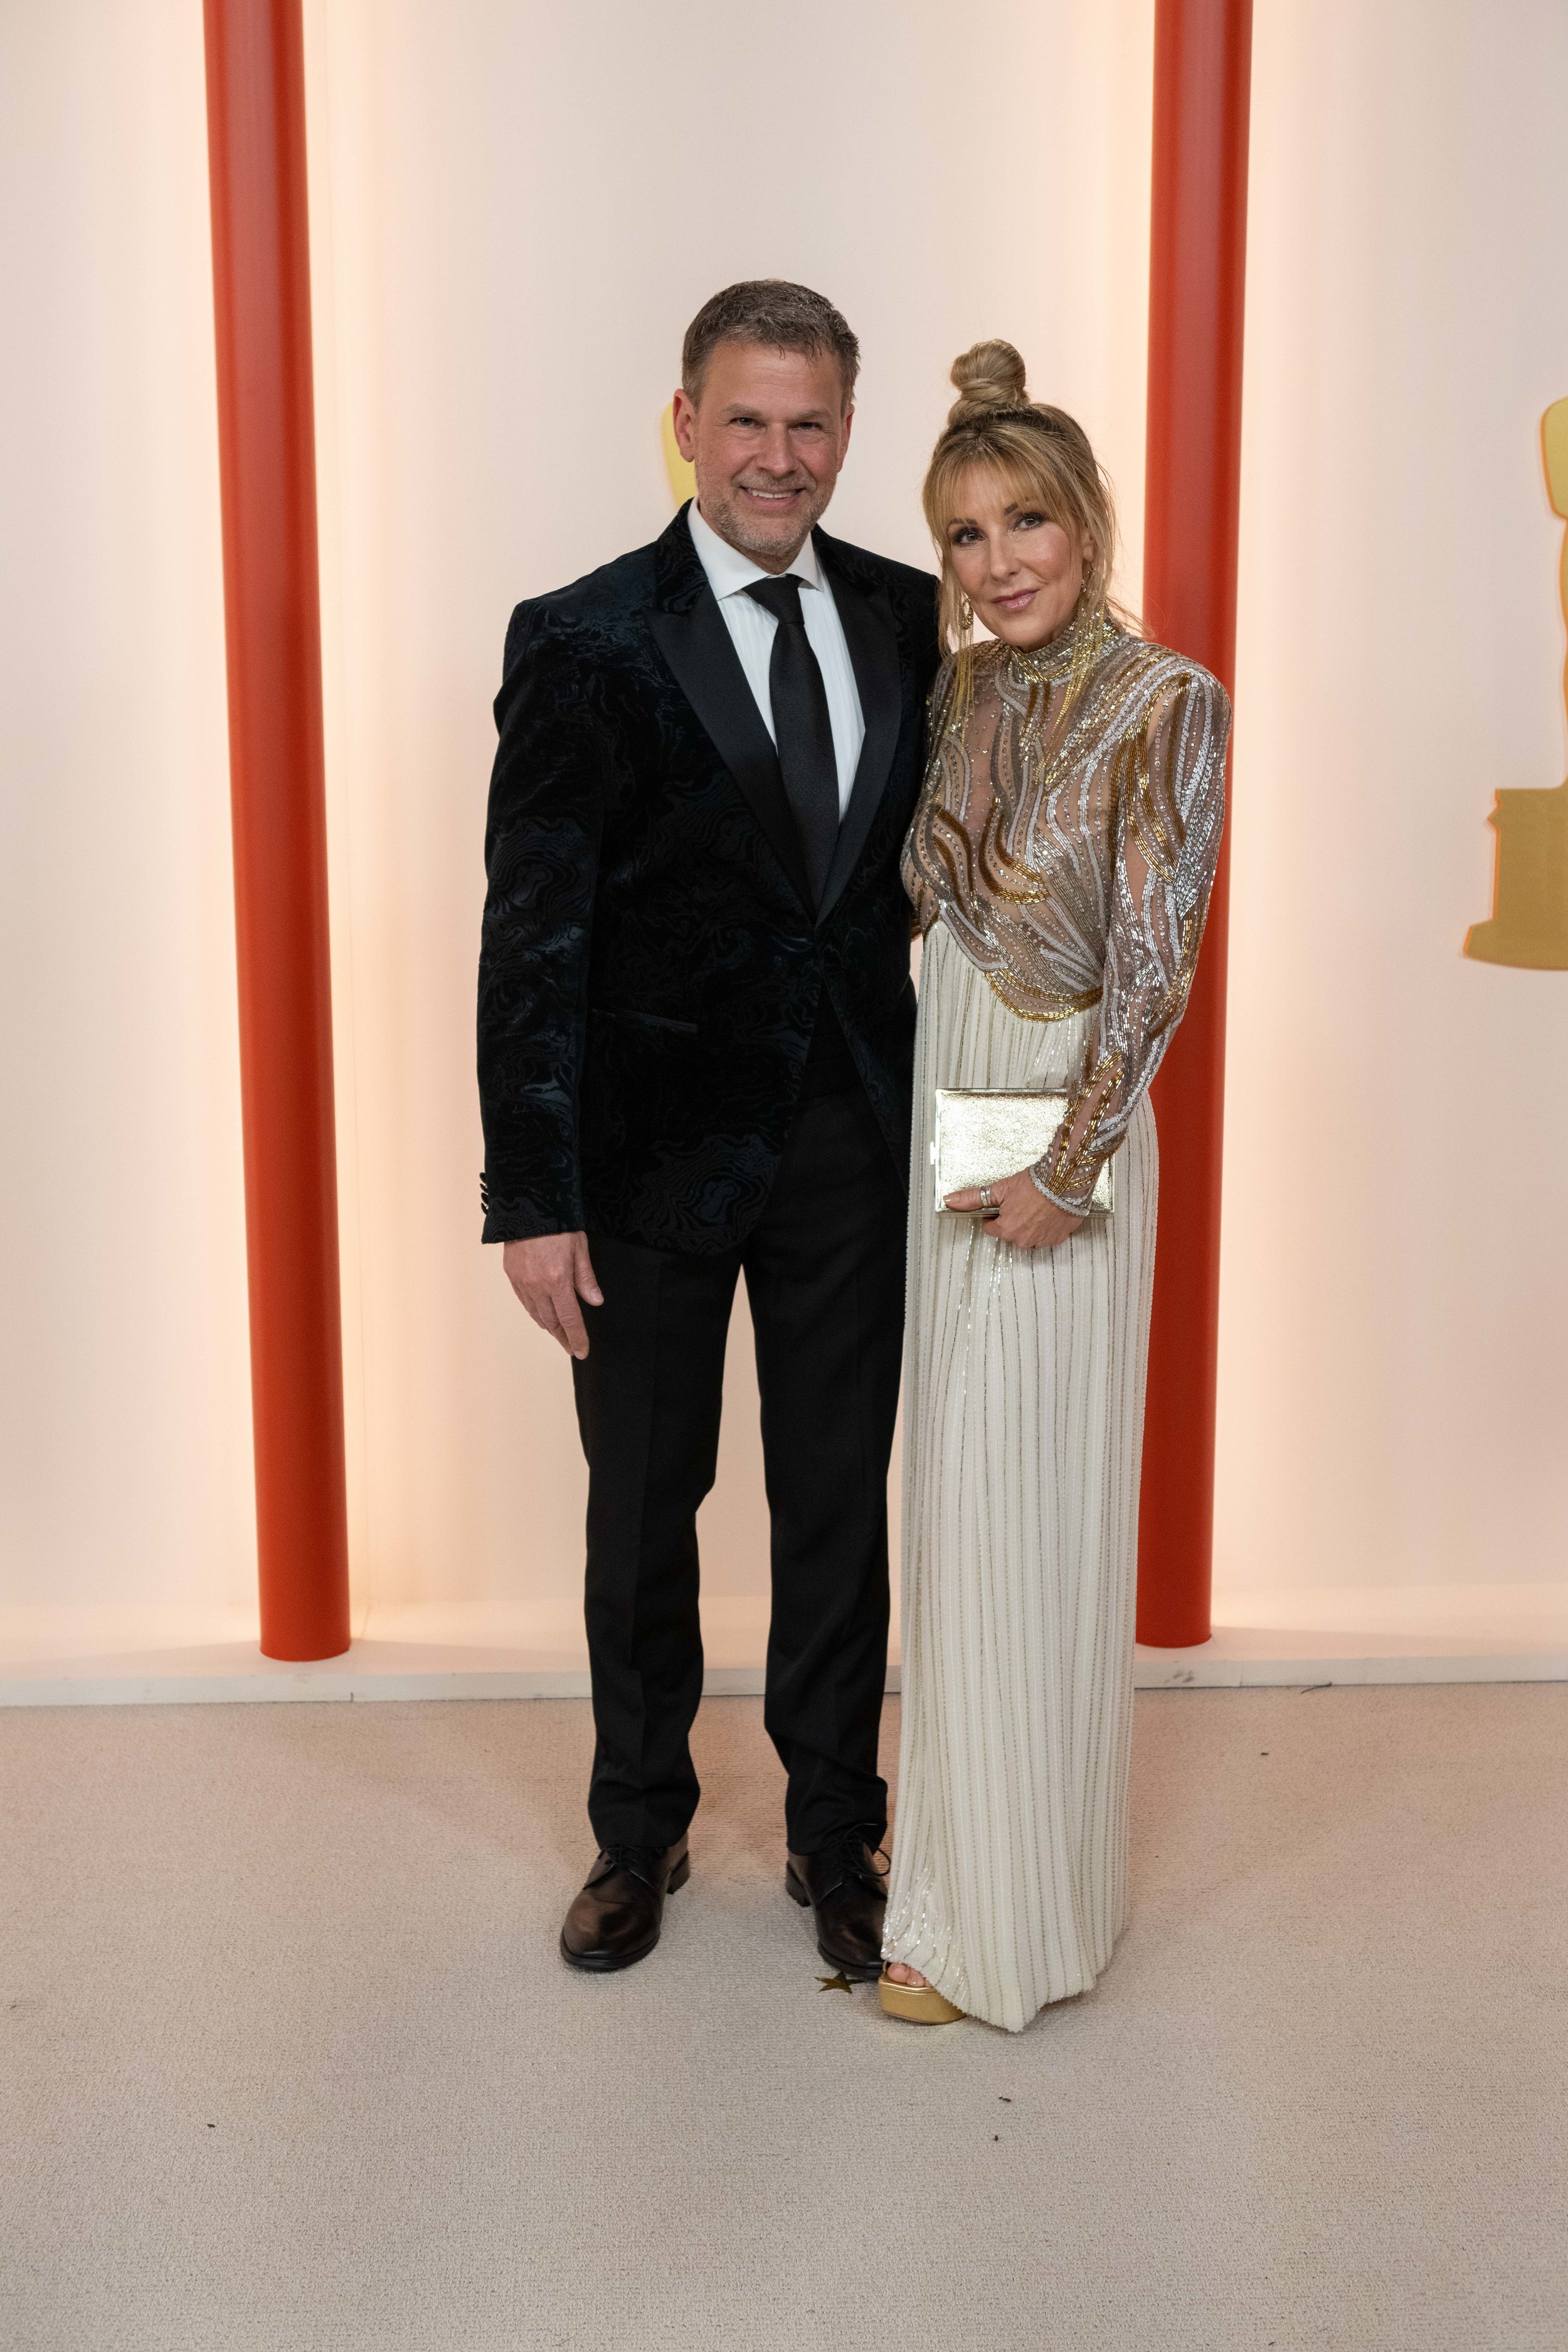 Oscar® nominee Joel Harlow and guest arrive on the red carpet of the 95th Oscars